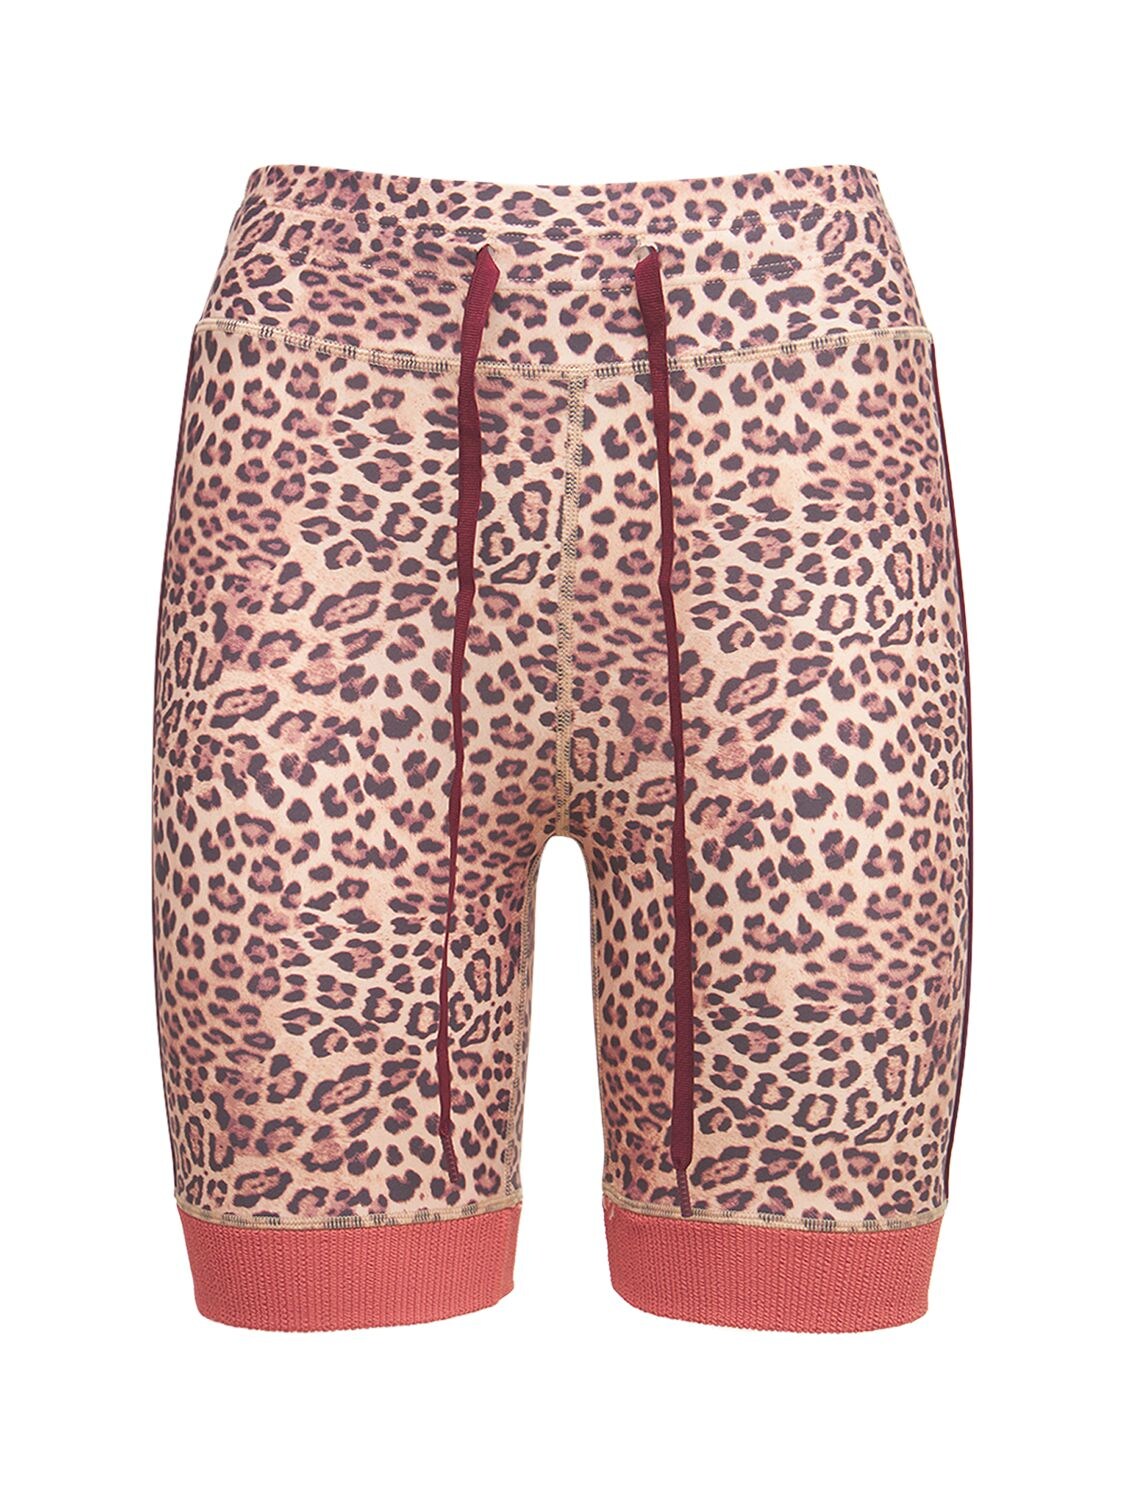 The Upside LEOPARD SPIN SHORTS